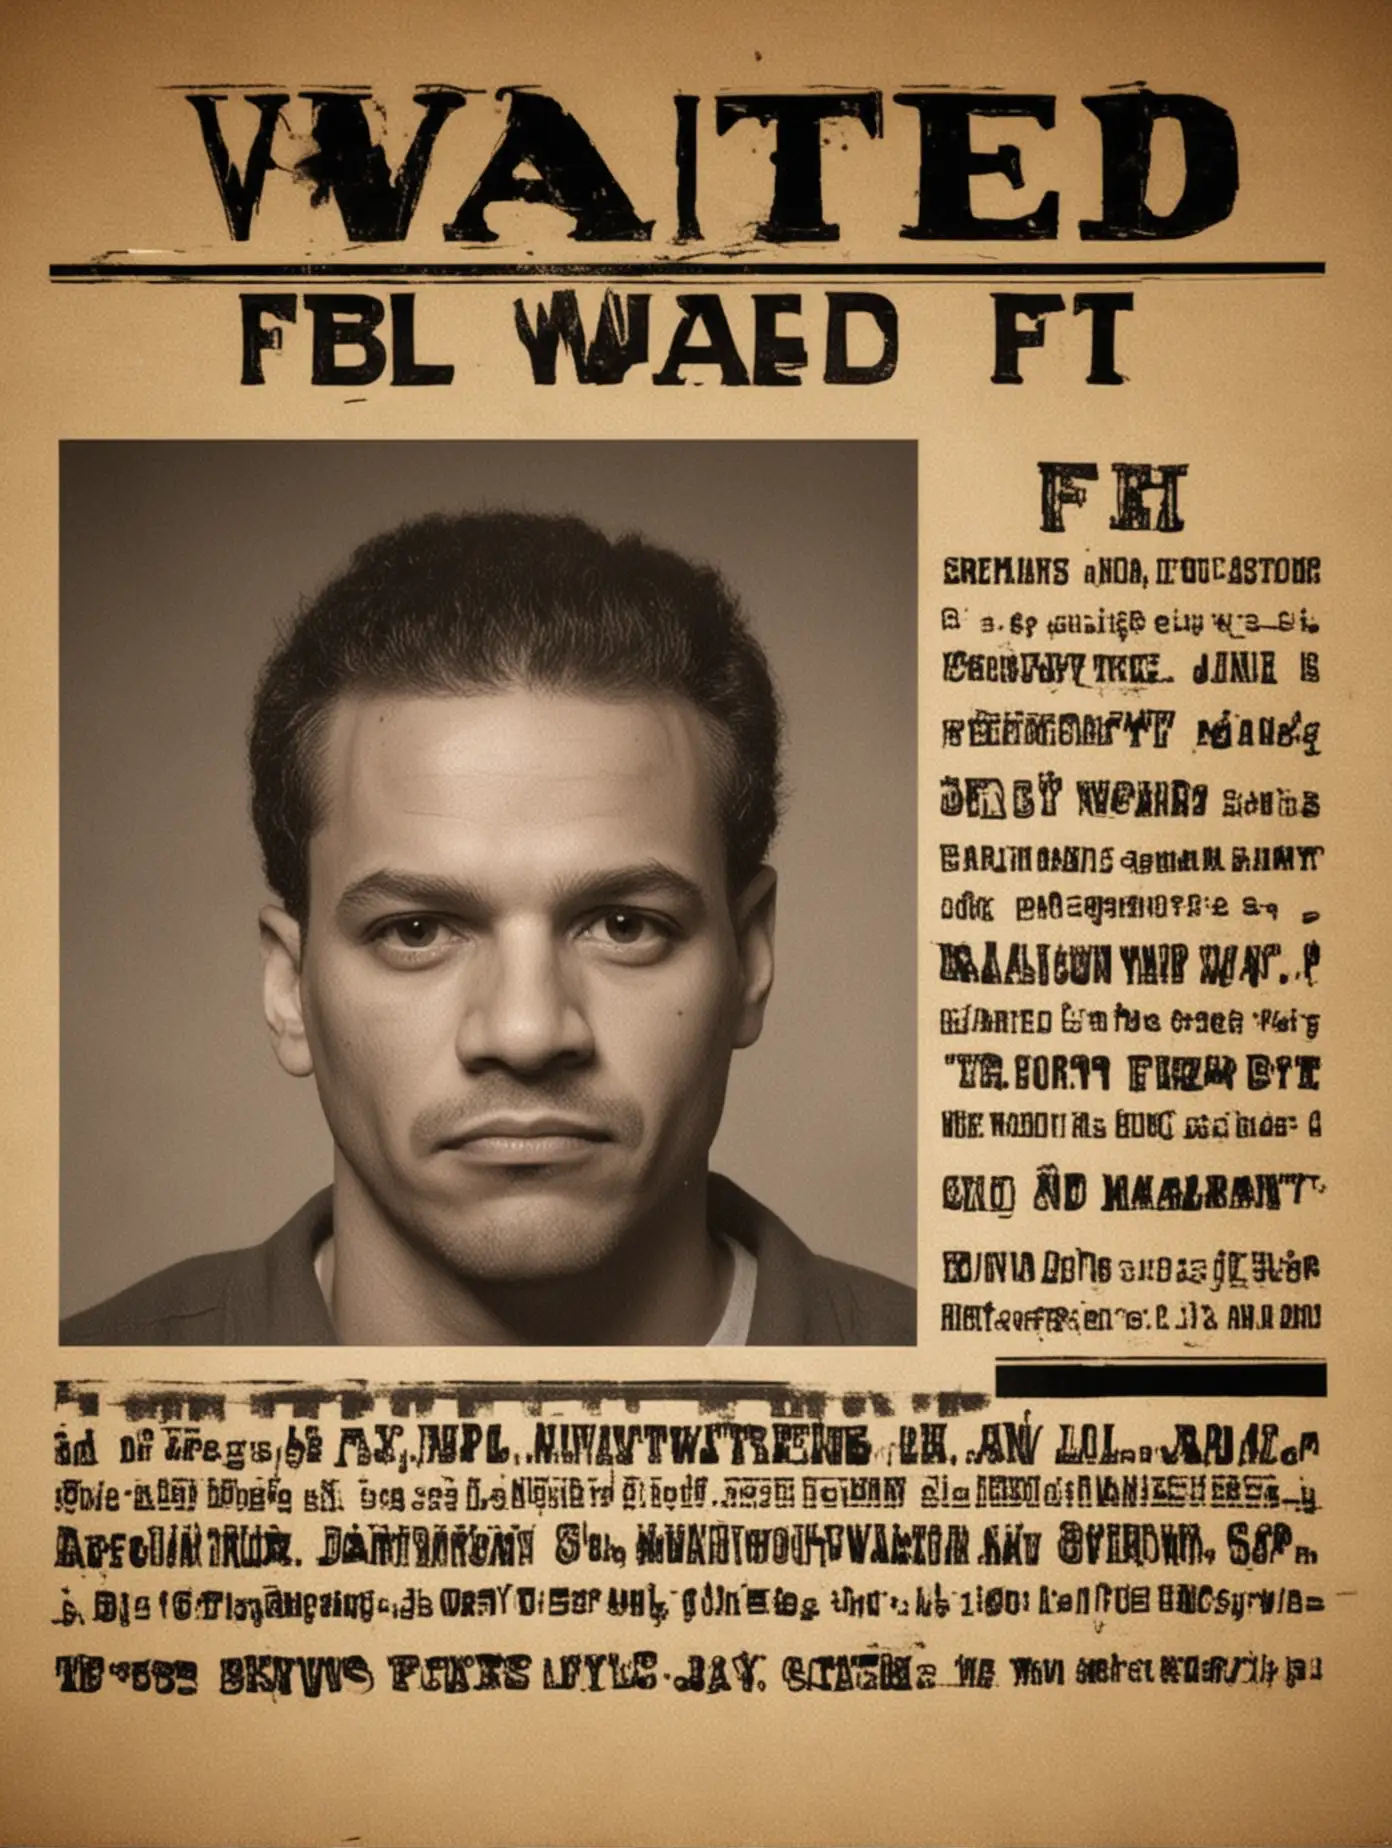 FBI Wanted Poster Featuring Mugshot of Suspect